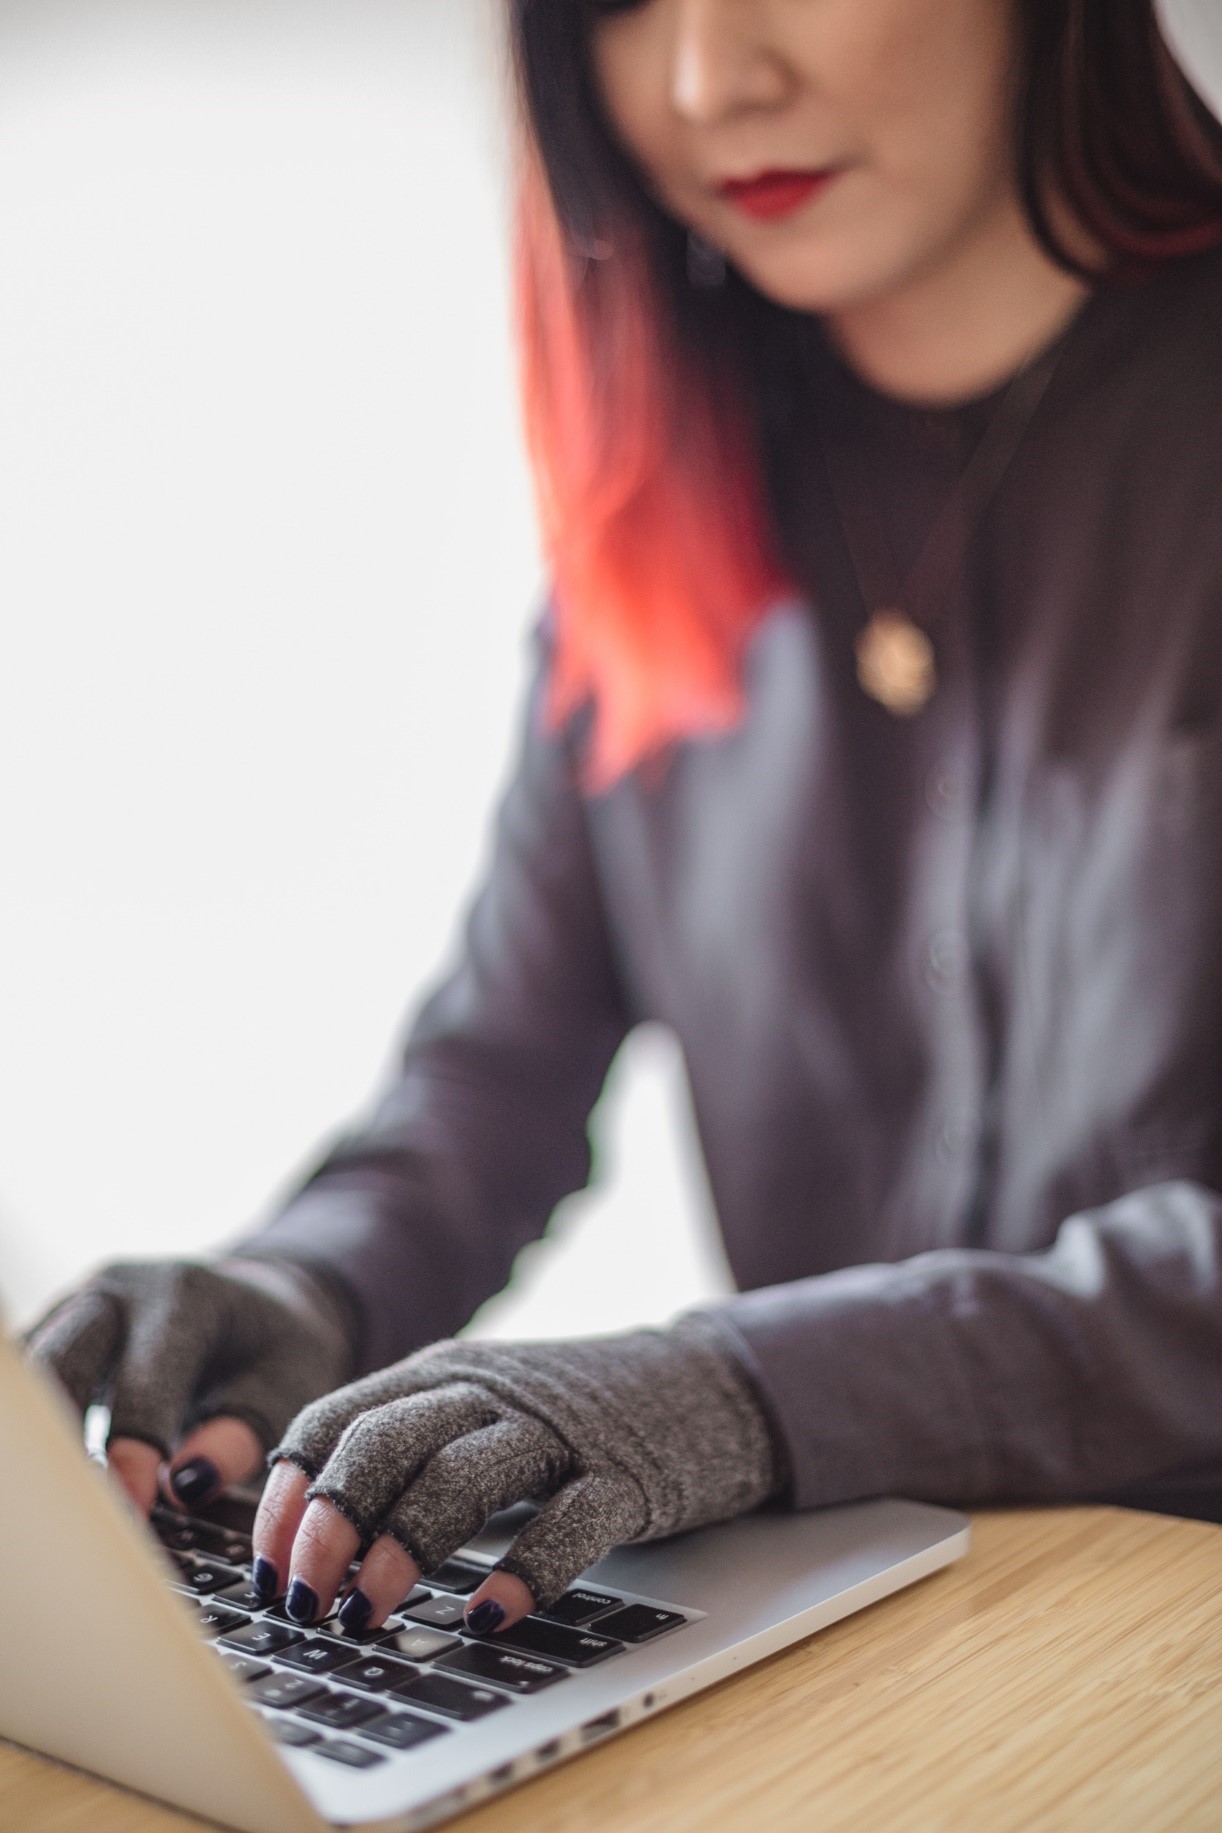 A disabled Asian genderfluid person types on a laptop while wearing compression gloves. The hands and keyboard are the focal point.